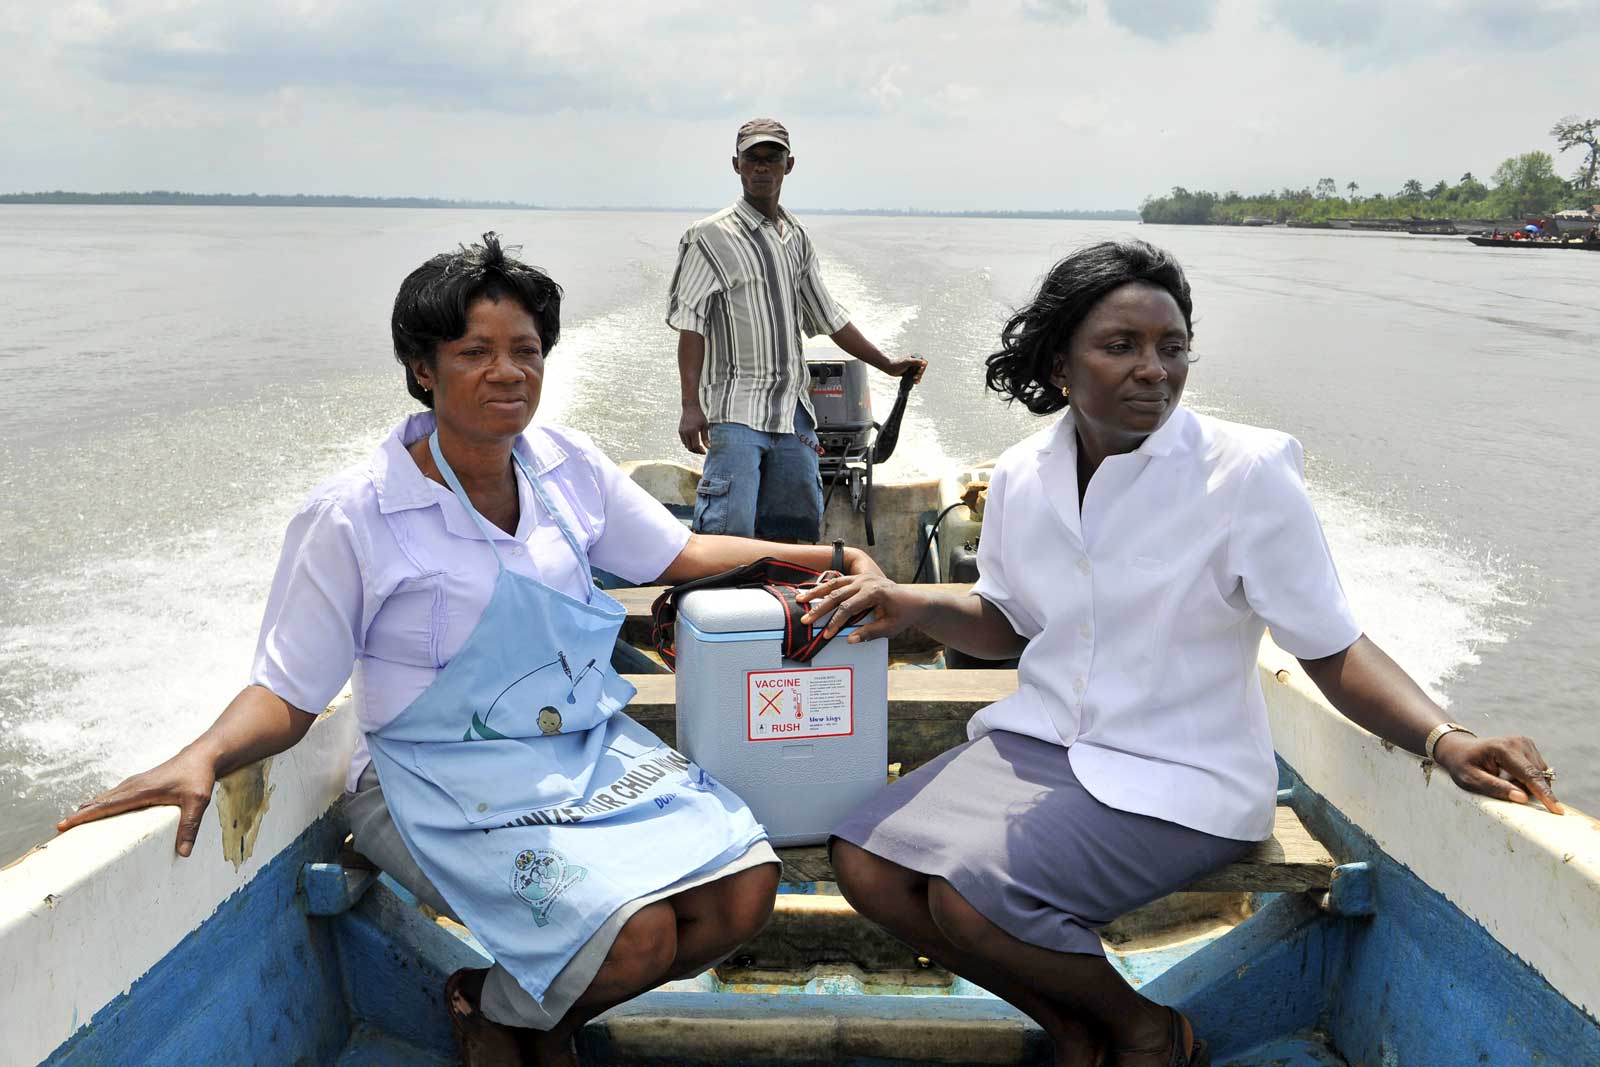  Universe Enebong (left) and Angelica Ujaga, community health workers, travel along the Atlantic estuary in Cross River State to reach remote villages that have no access to roads and can be reached only by boat.